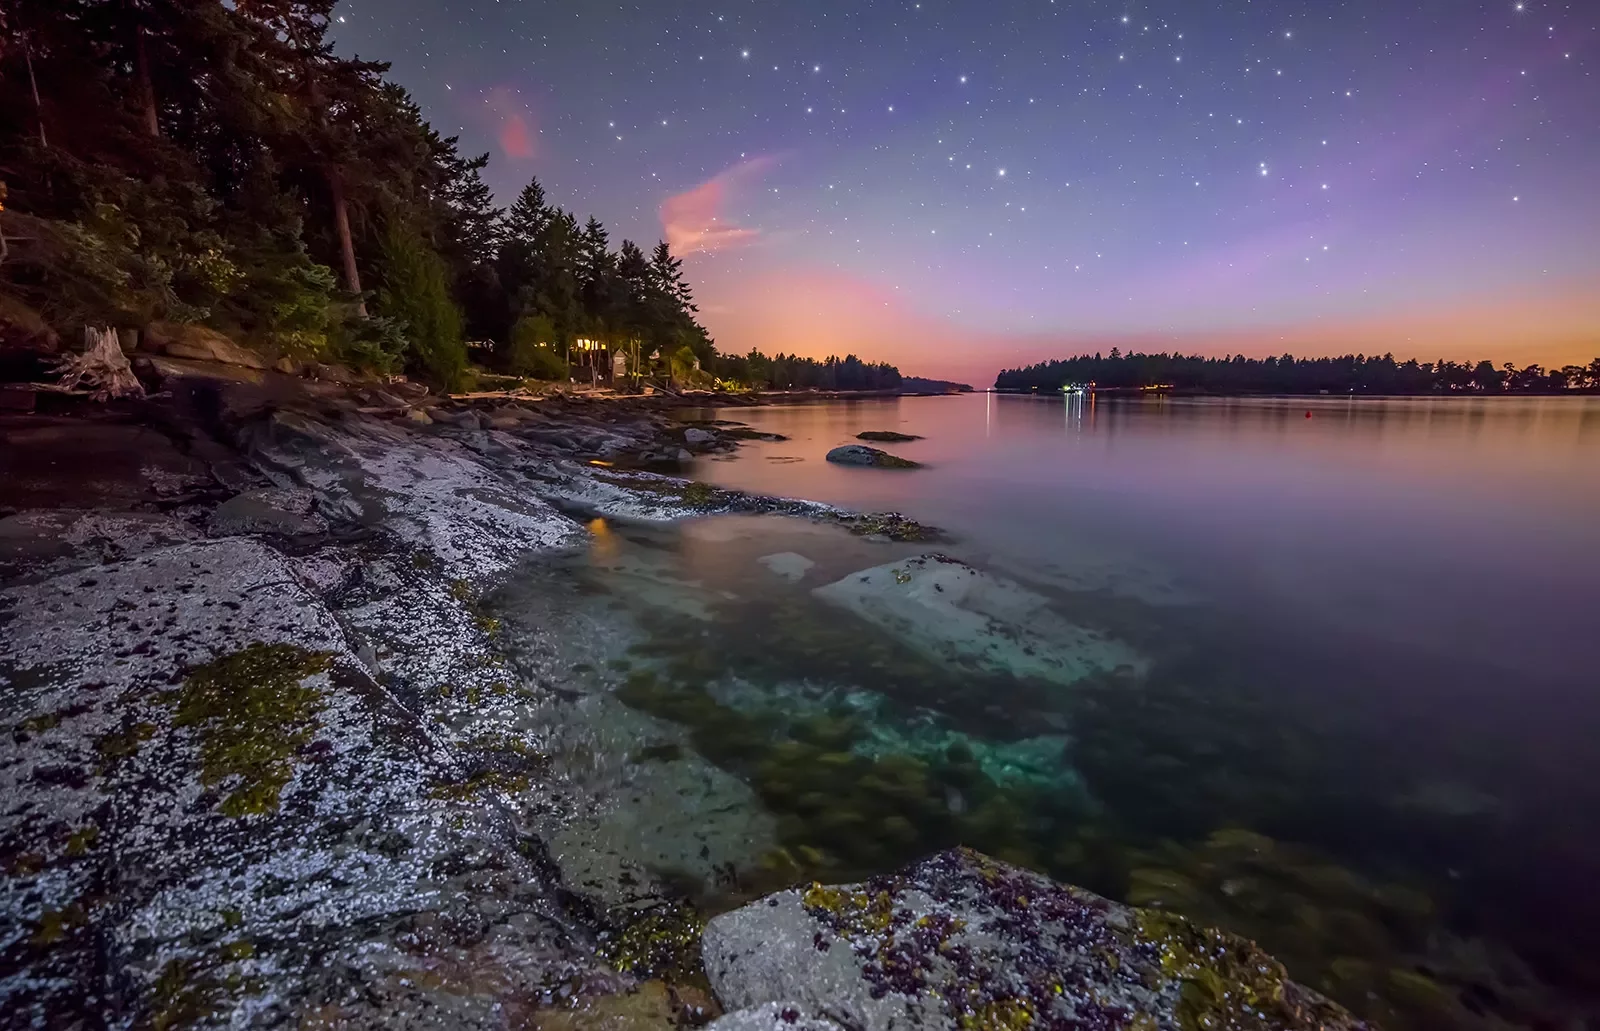 Wide shot of lake at sunset, large stars twinkling in the night sky.